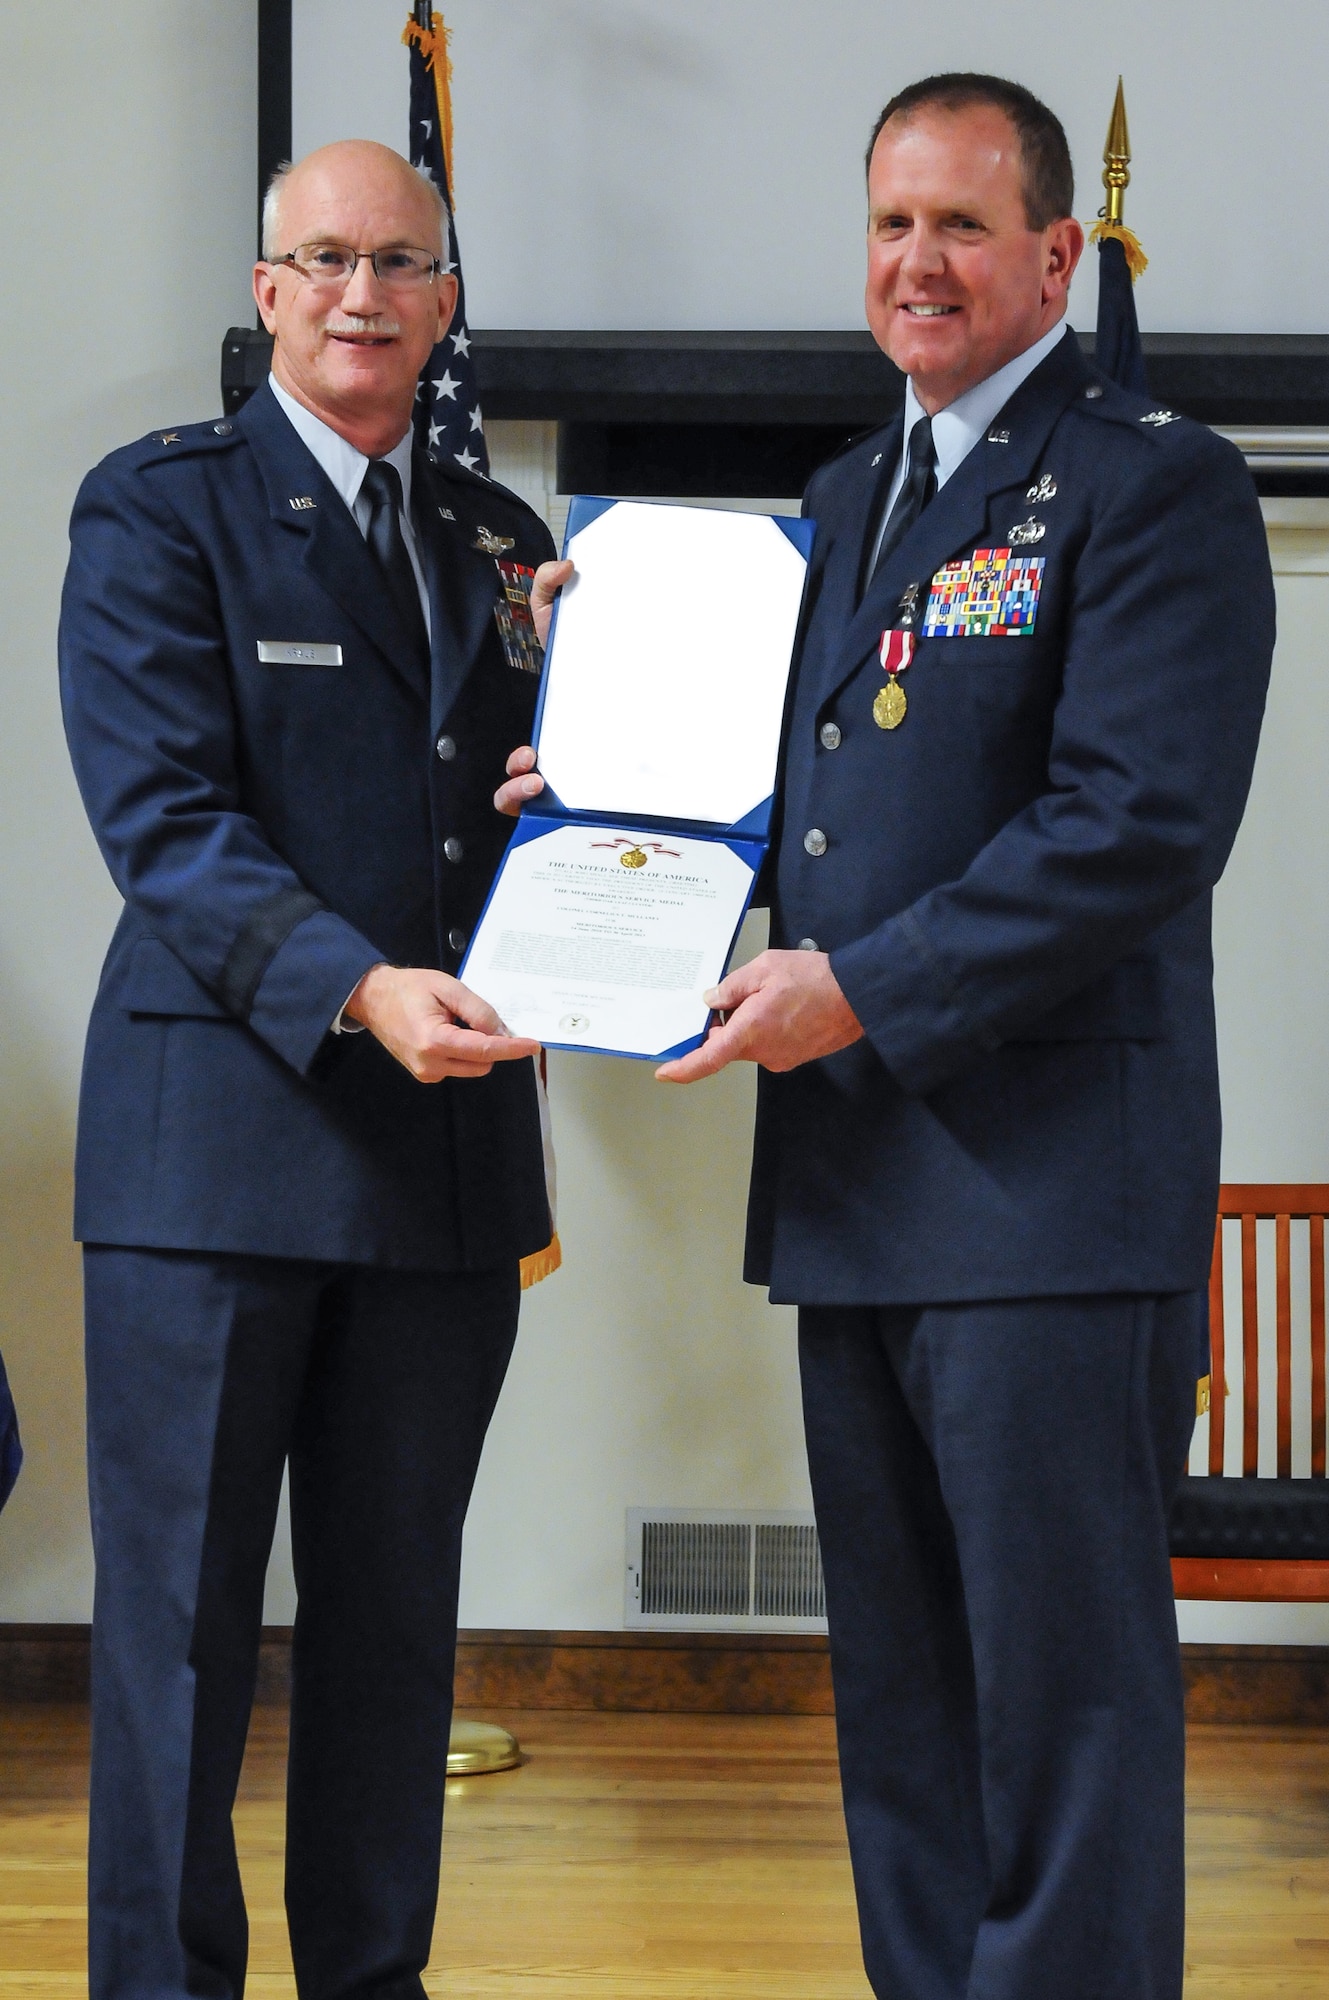 Col. Neil Mullaney (right), outgoing director of the Air Staff at Joint Forces Headquarters—Kentucky, receives a Meritorious Service Medal, third Oak Leaf Cluster, from Brig. Gen. Mark Kraus, Kentucky’s assistant adjutant general for Air, during a retirement ceremony Feb. 2, 2013, at the Kentucky Air National Guard Base in Louisville, Ky. Mullaney participated in four conflicts and commanded multiple units during his 24-year career. (U.S. Air Force photo illustration by Senior Airman Vicky Spesard, Kentucky Air National Guard)